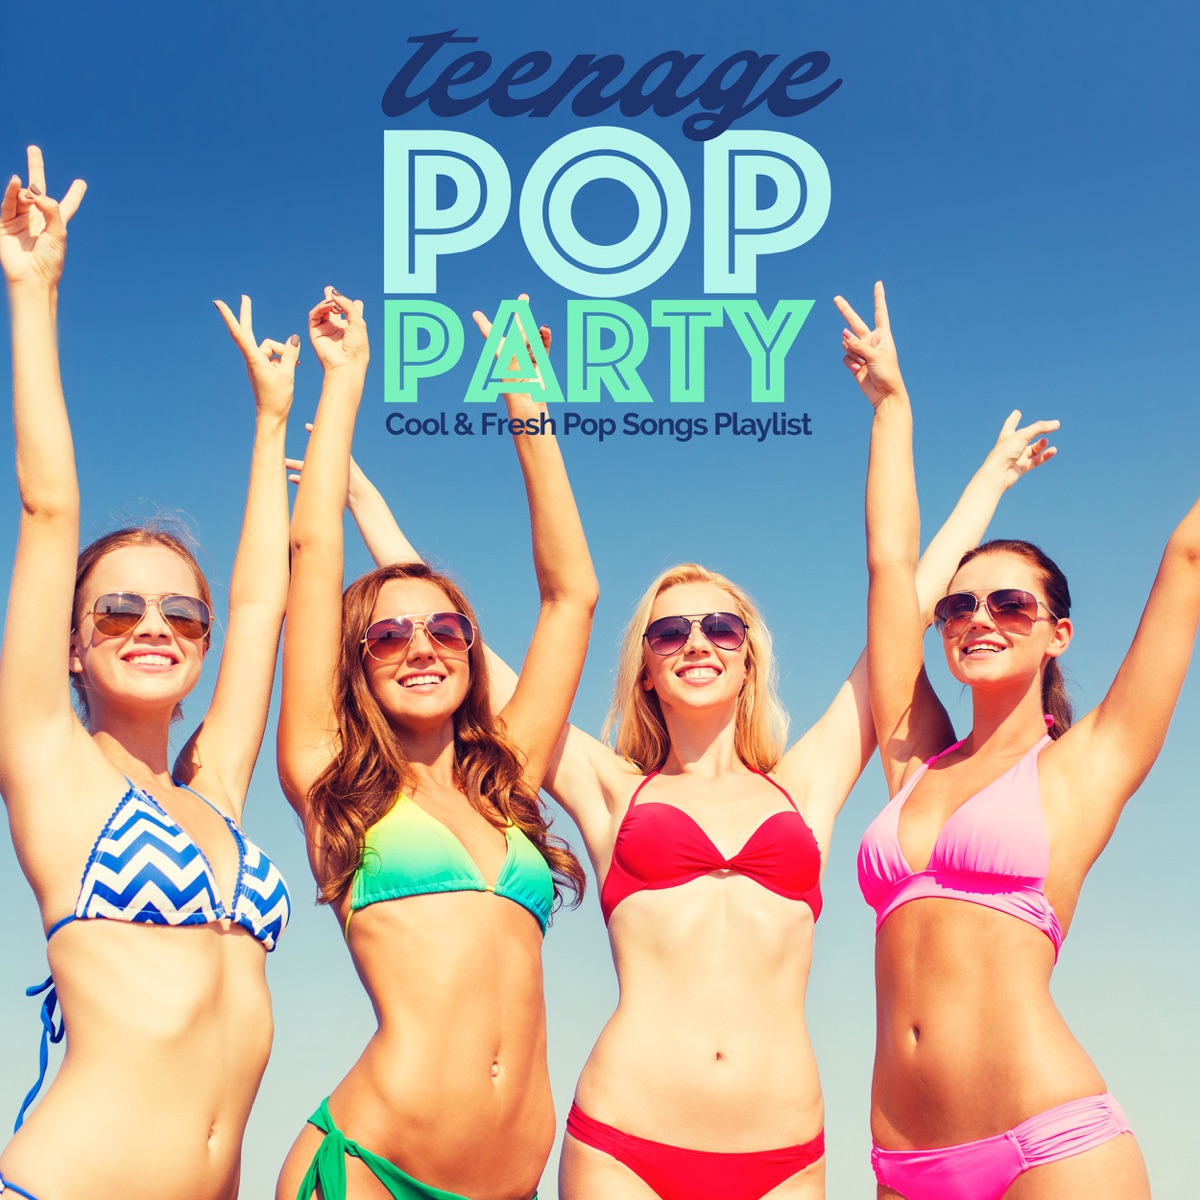 Teenage Pop Party (Cool & Fresh Pop Songs Playlist) by Various Artists on  Apple Music